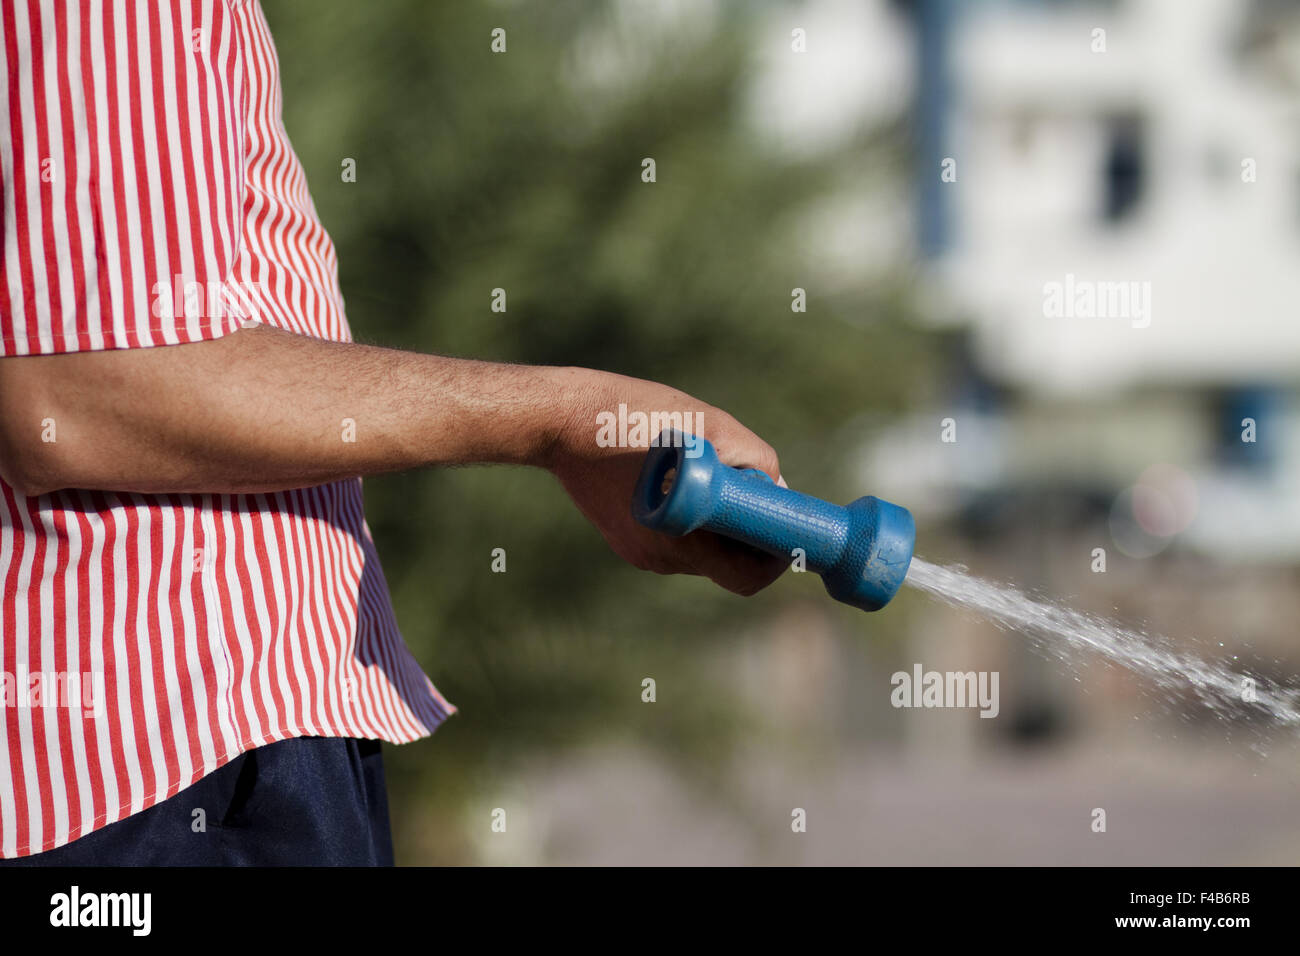 Water hose nozzle in the hand Stock Photo